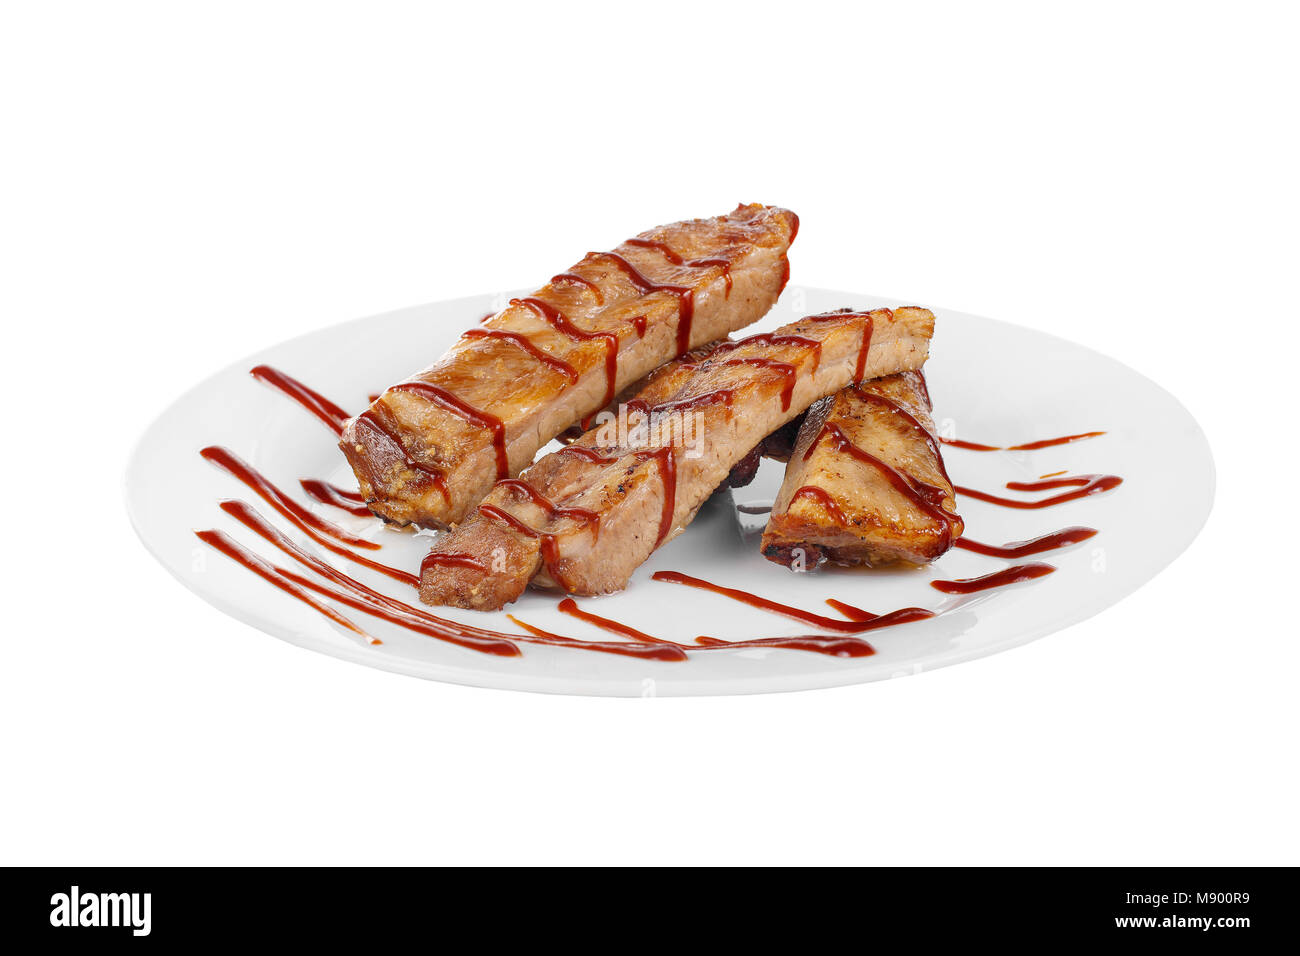 Ribs meat grill, barbecue, beef, lamb, barbecue sauce, tomato, spicy on a plate isolated white background. For the menu of the restaurant, bar, cafe.  Stock Photo